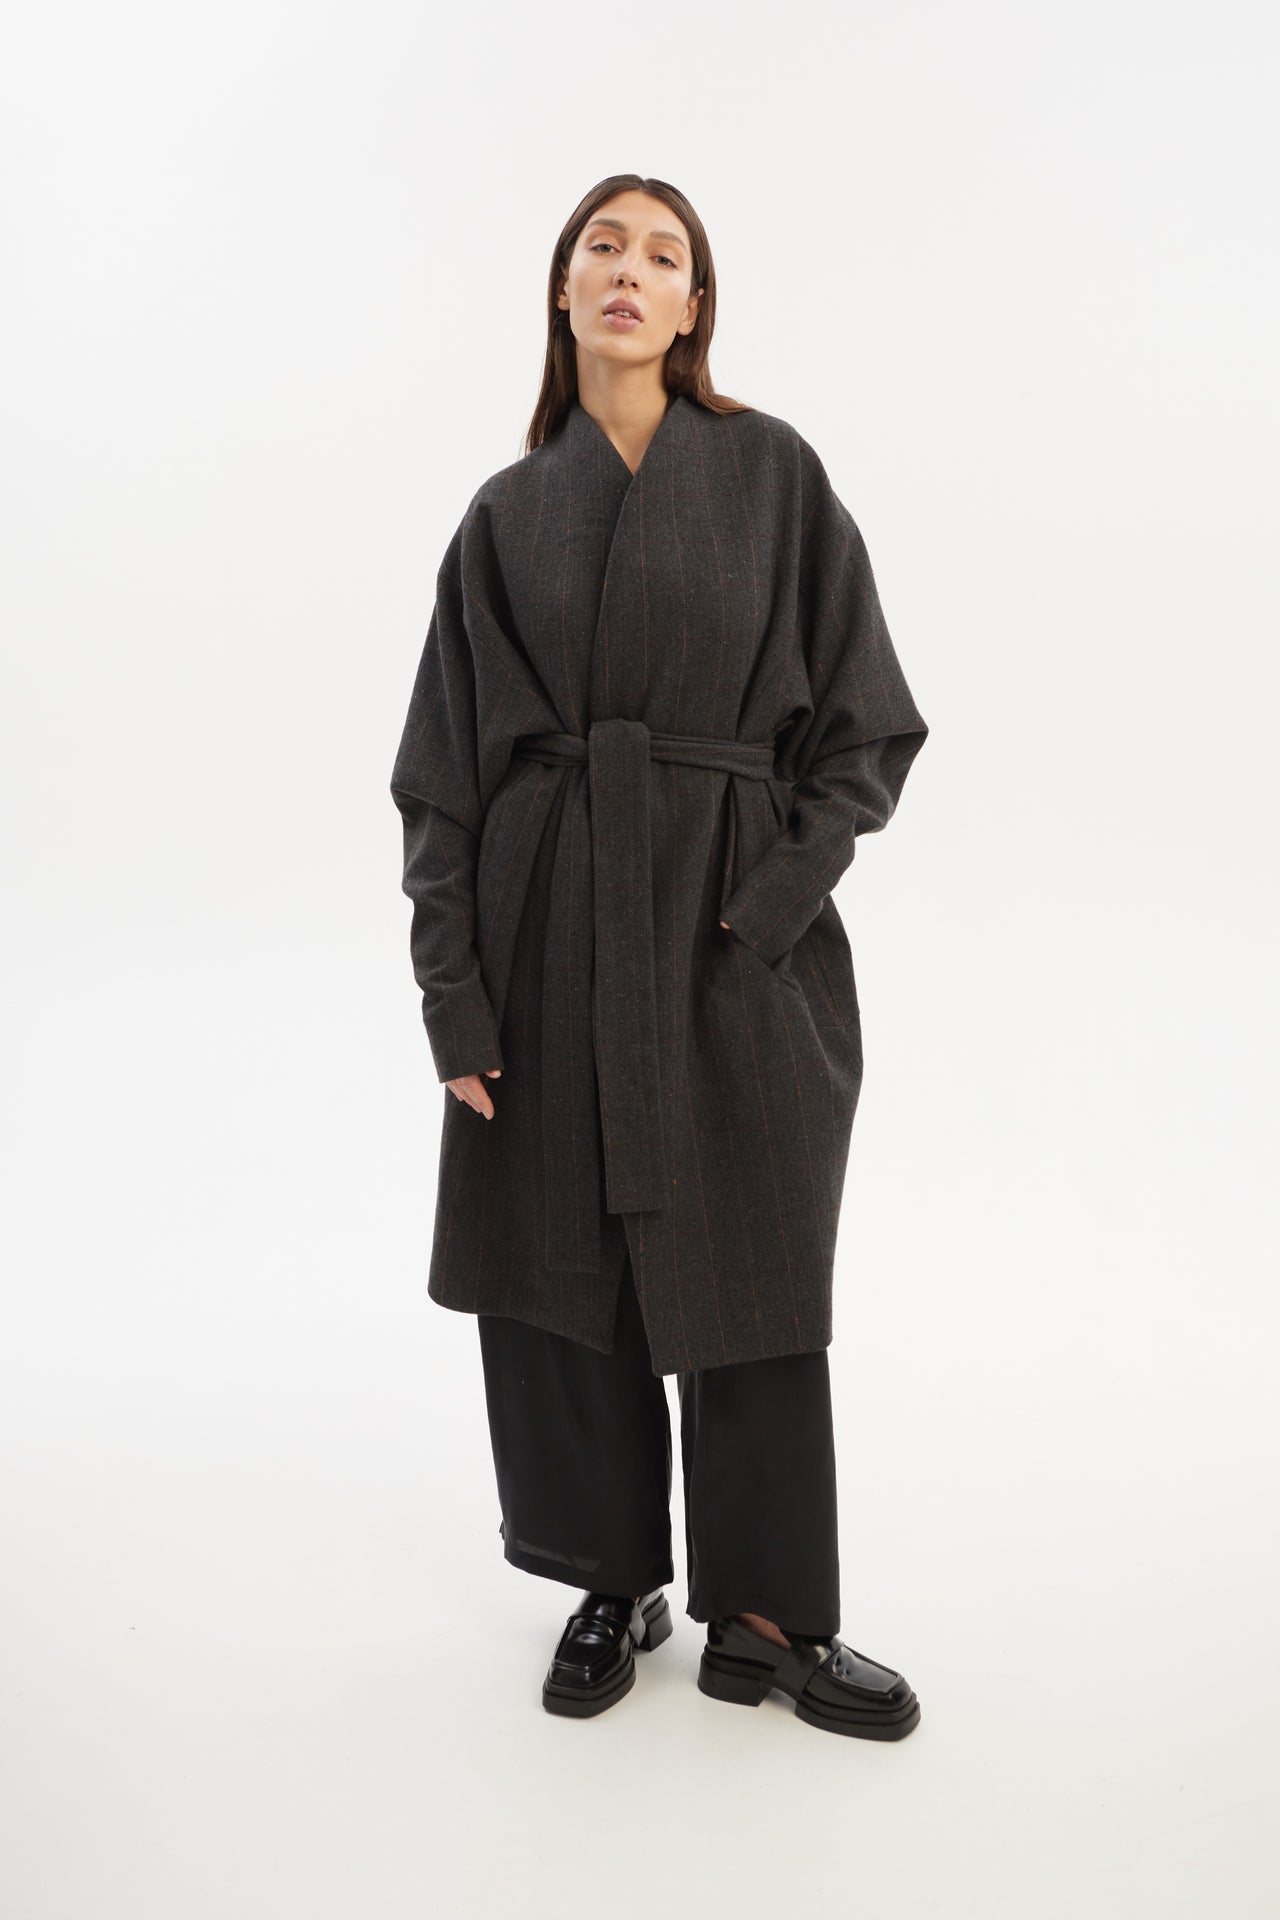 Oversized cocoon wool coat with long tapered sleeves